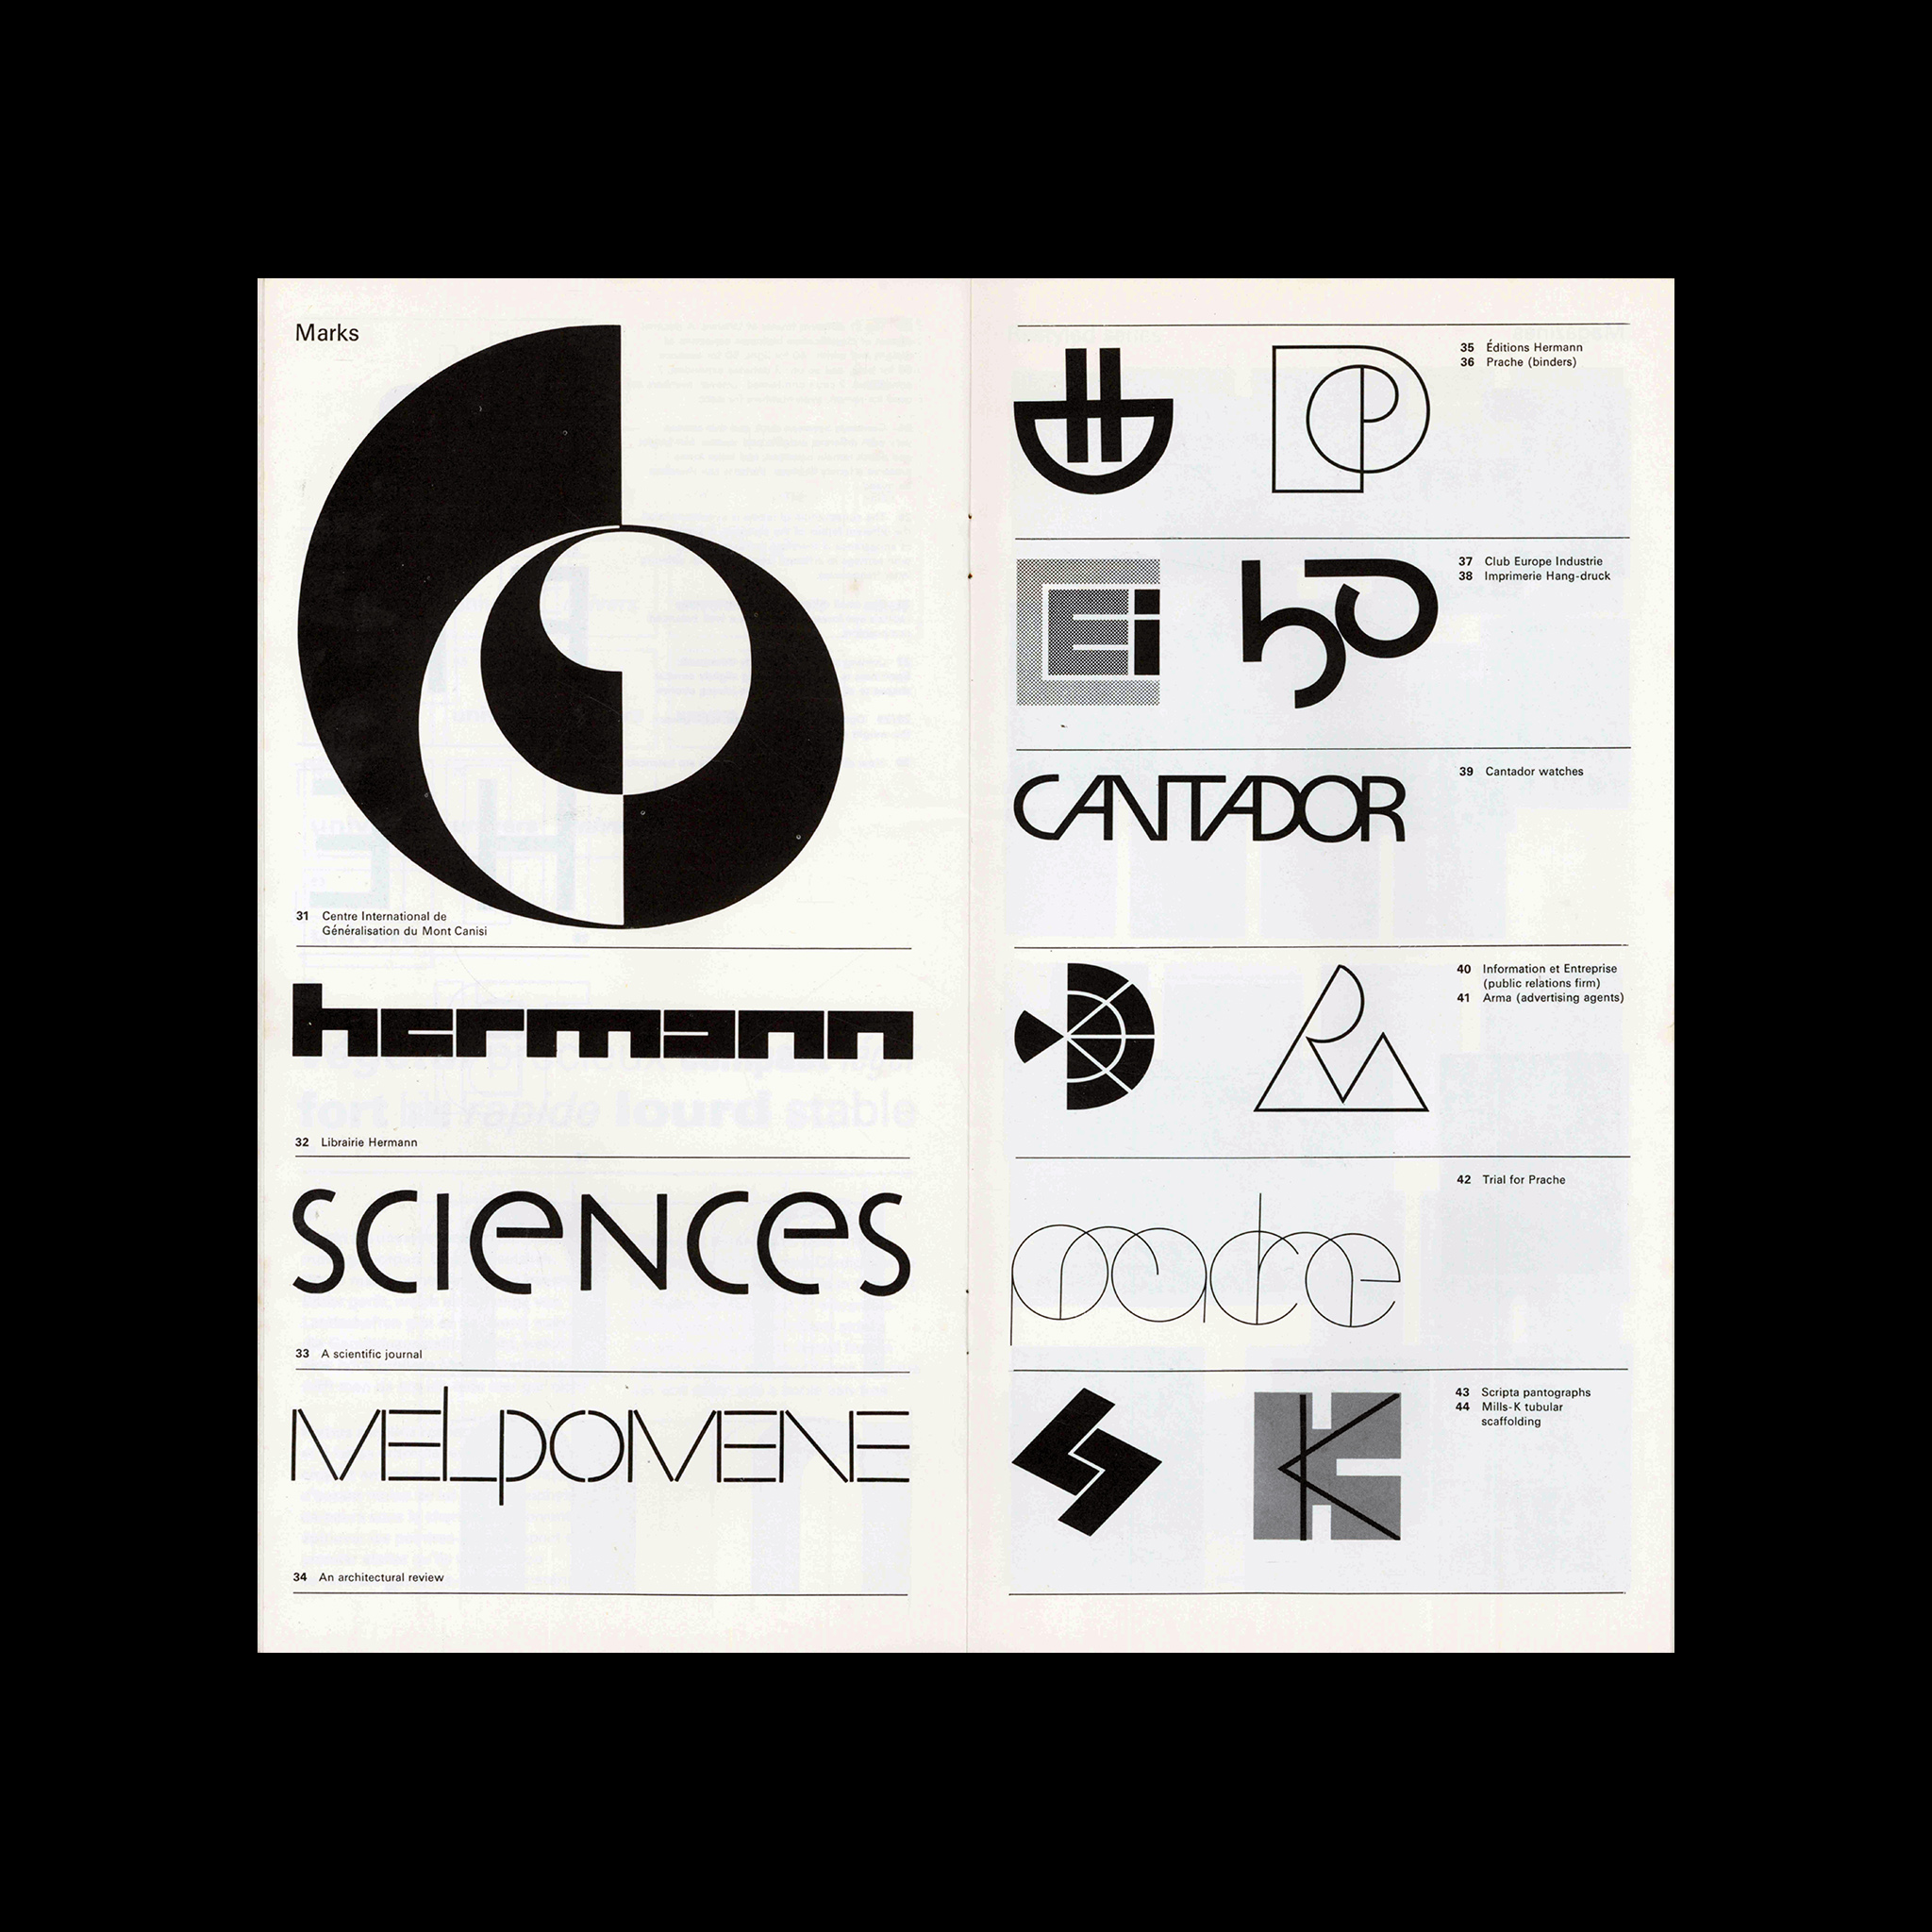 Graphismes by Frutiger, Monotype House, 1964